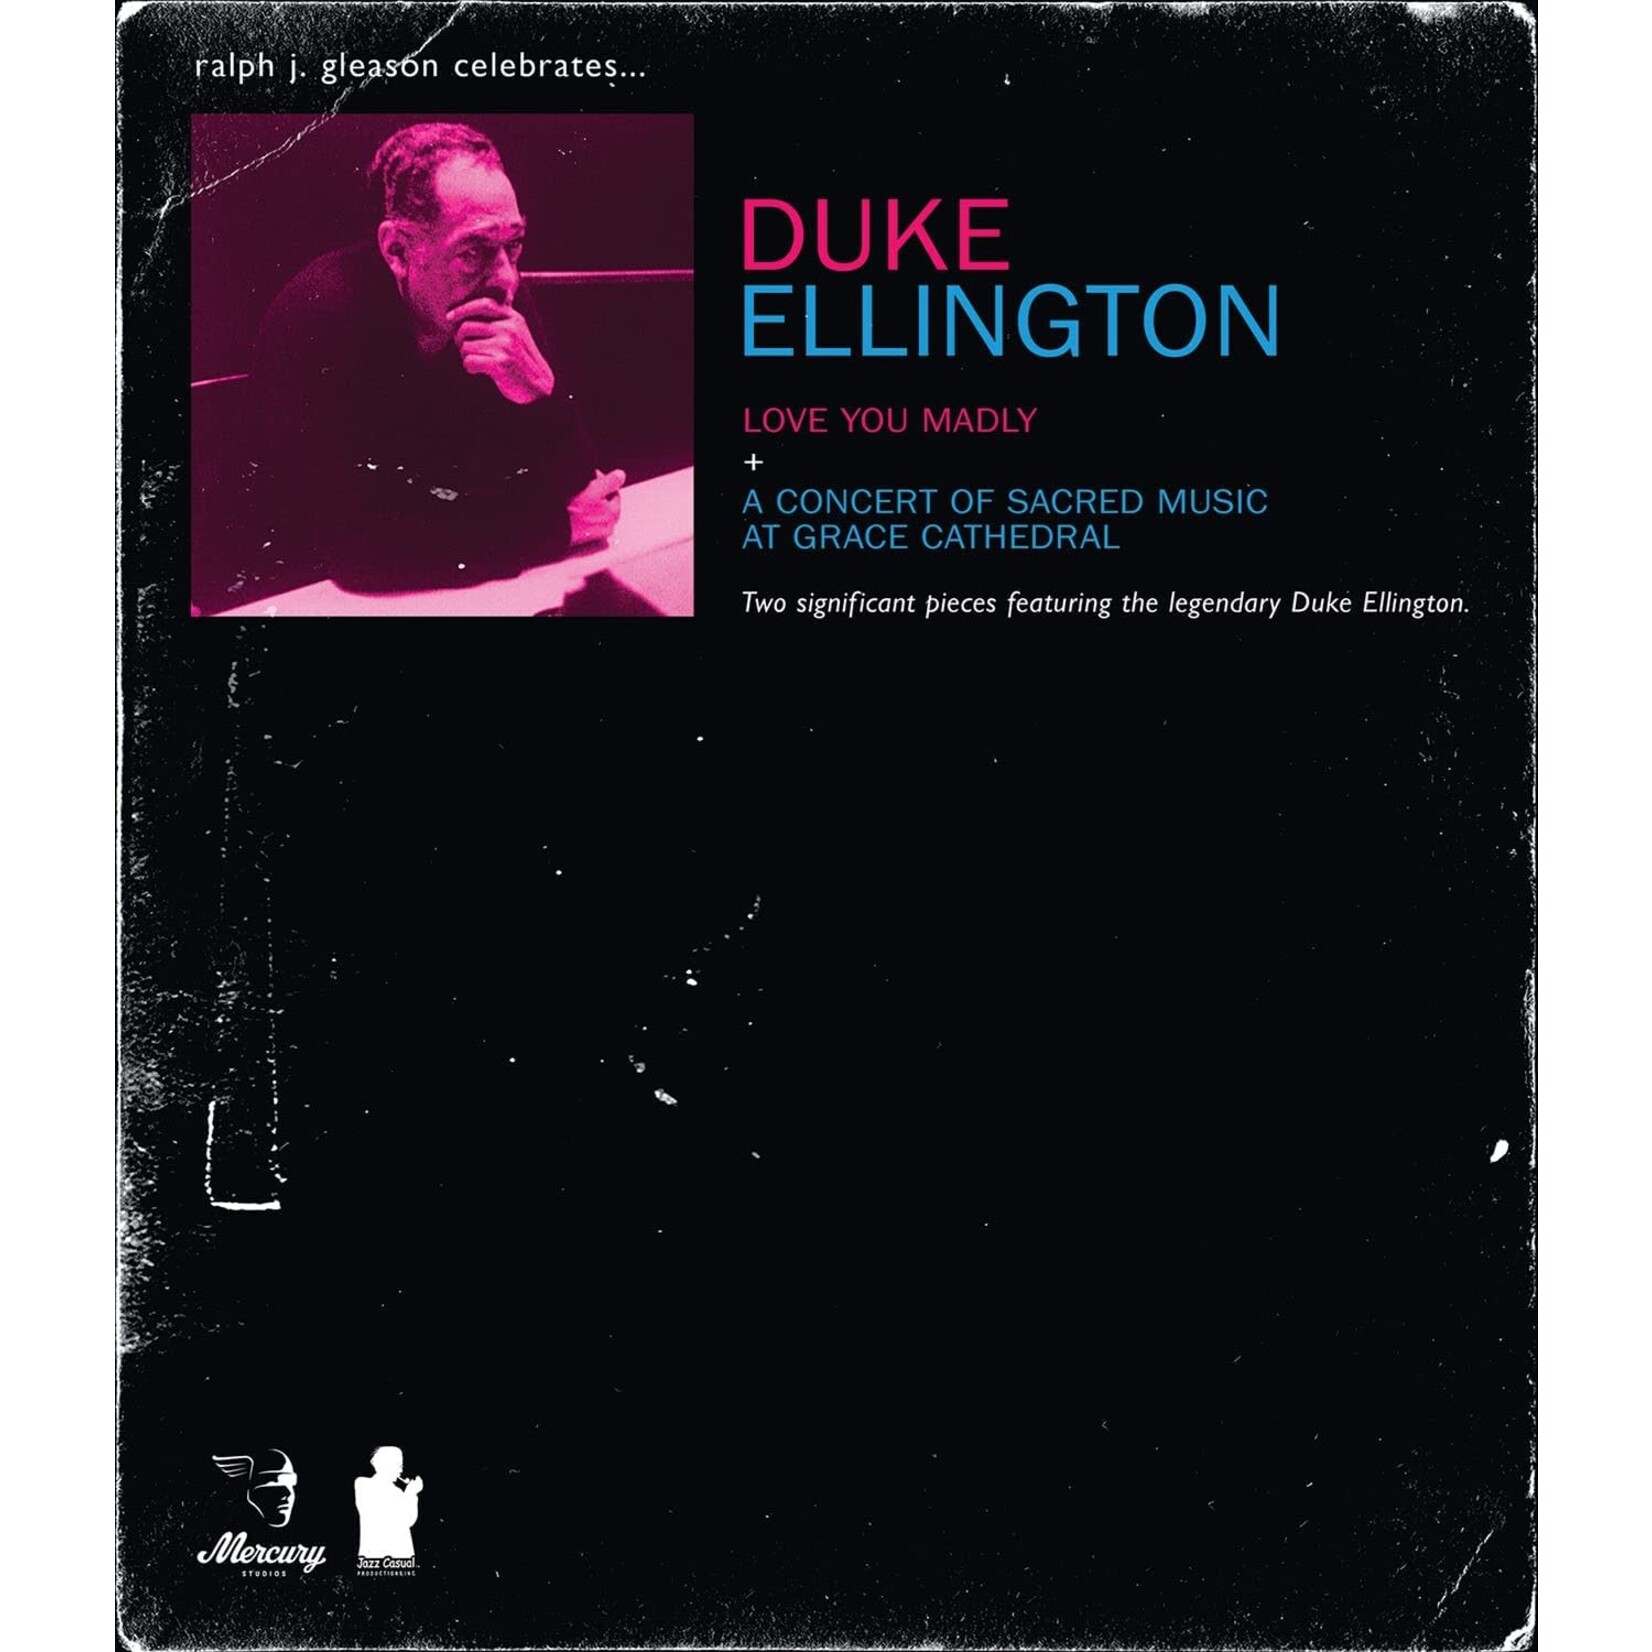 Duke Ellington - Love You Madly/A Concert Of Sacred Music At Grace Cathedral [DVD]